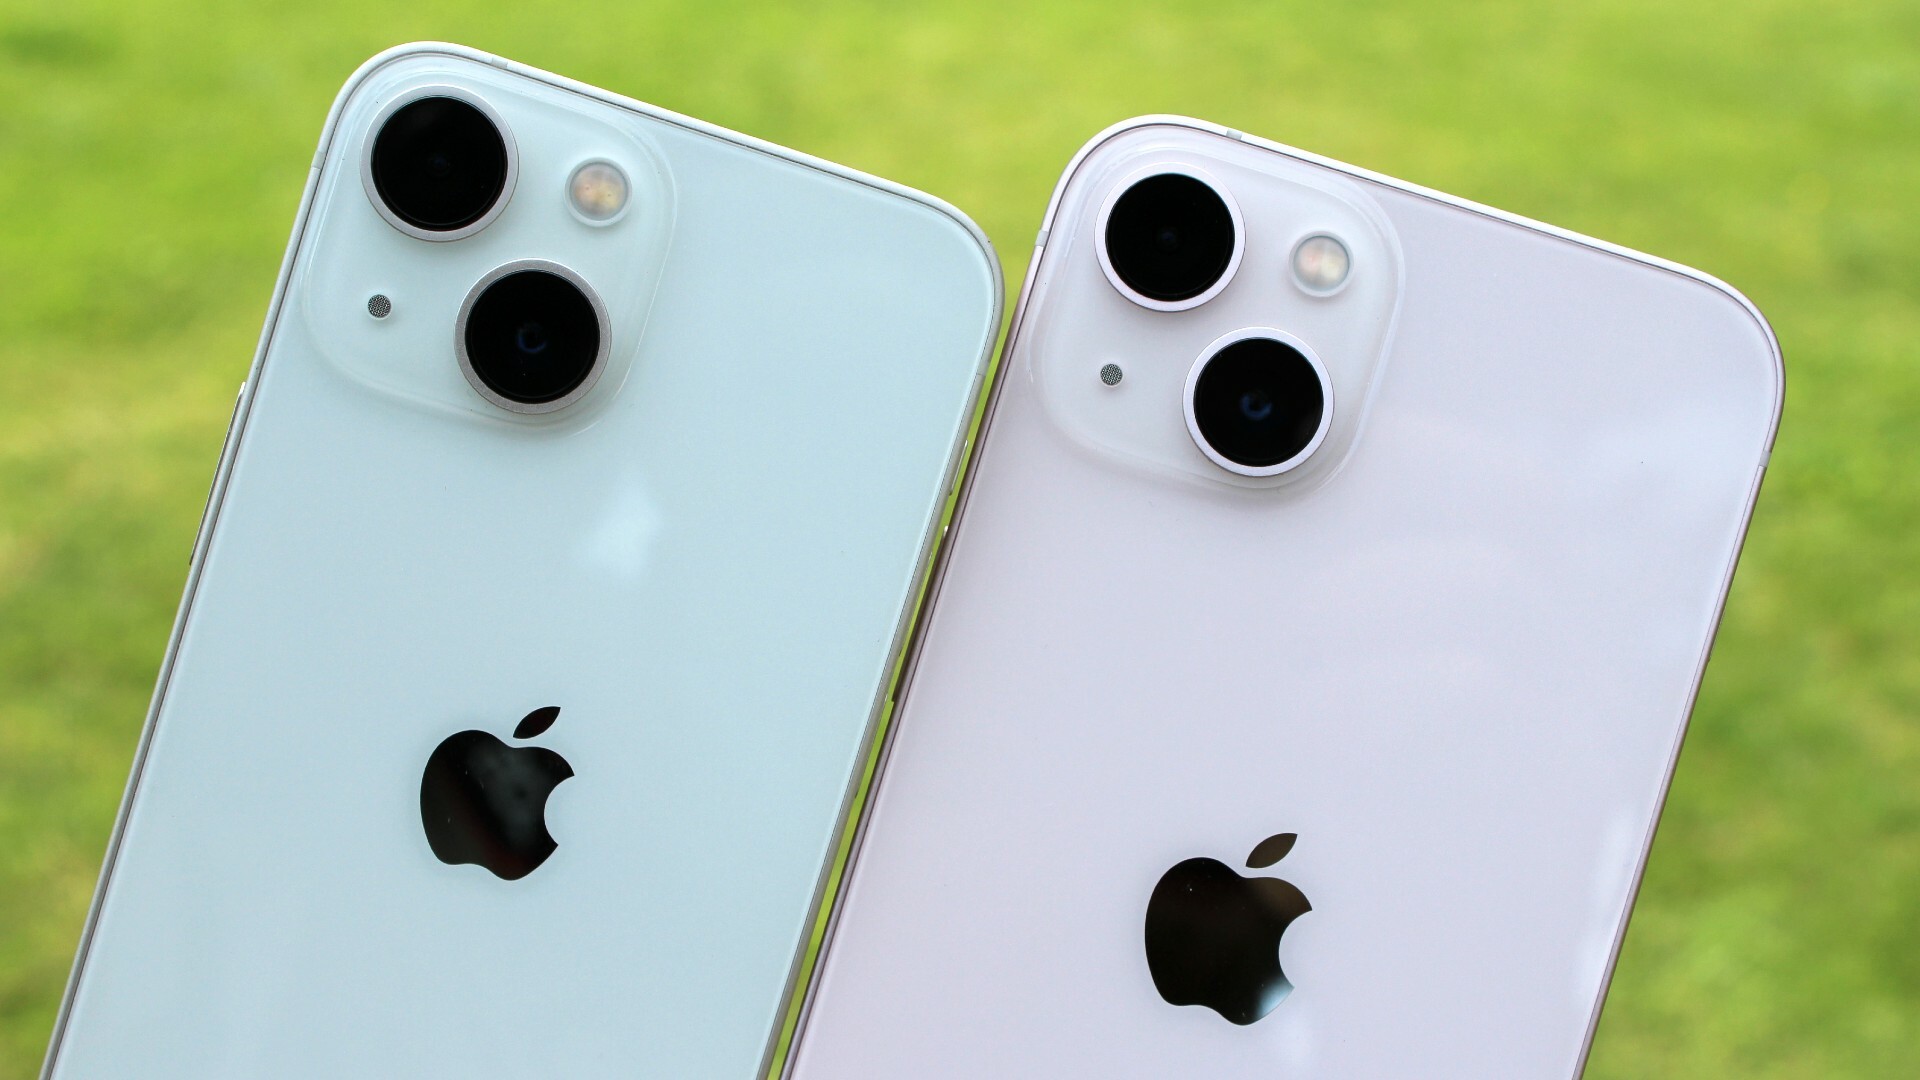 The telephoto lens and the lidar are missing from the iPhone 13 and the iPhone 13 mini.